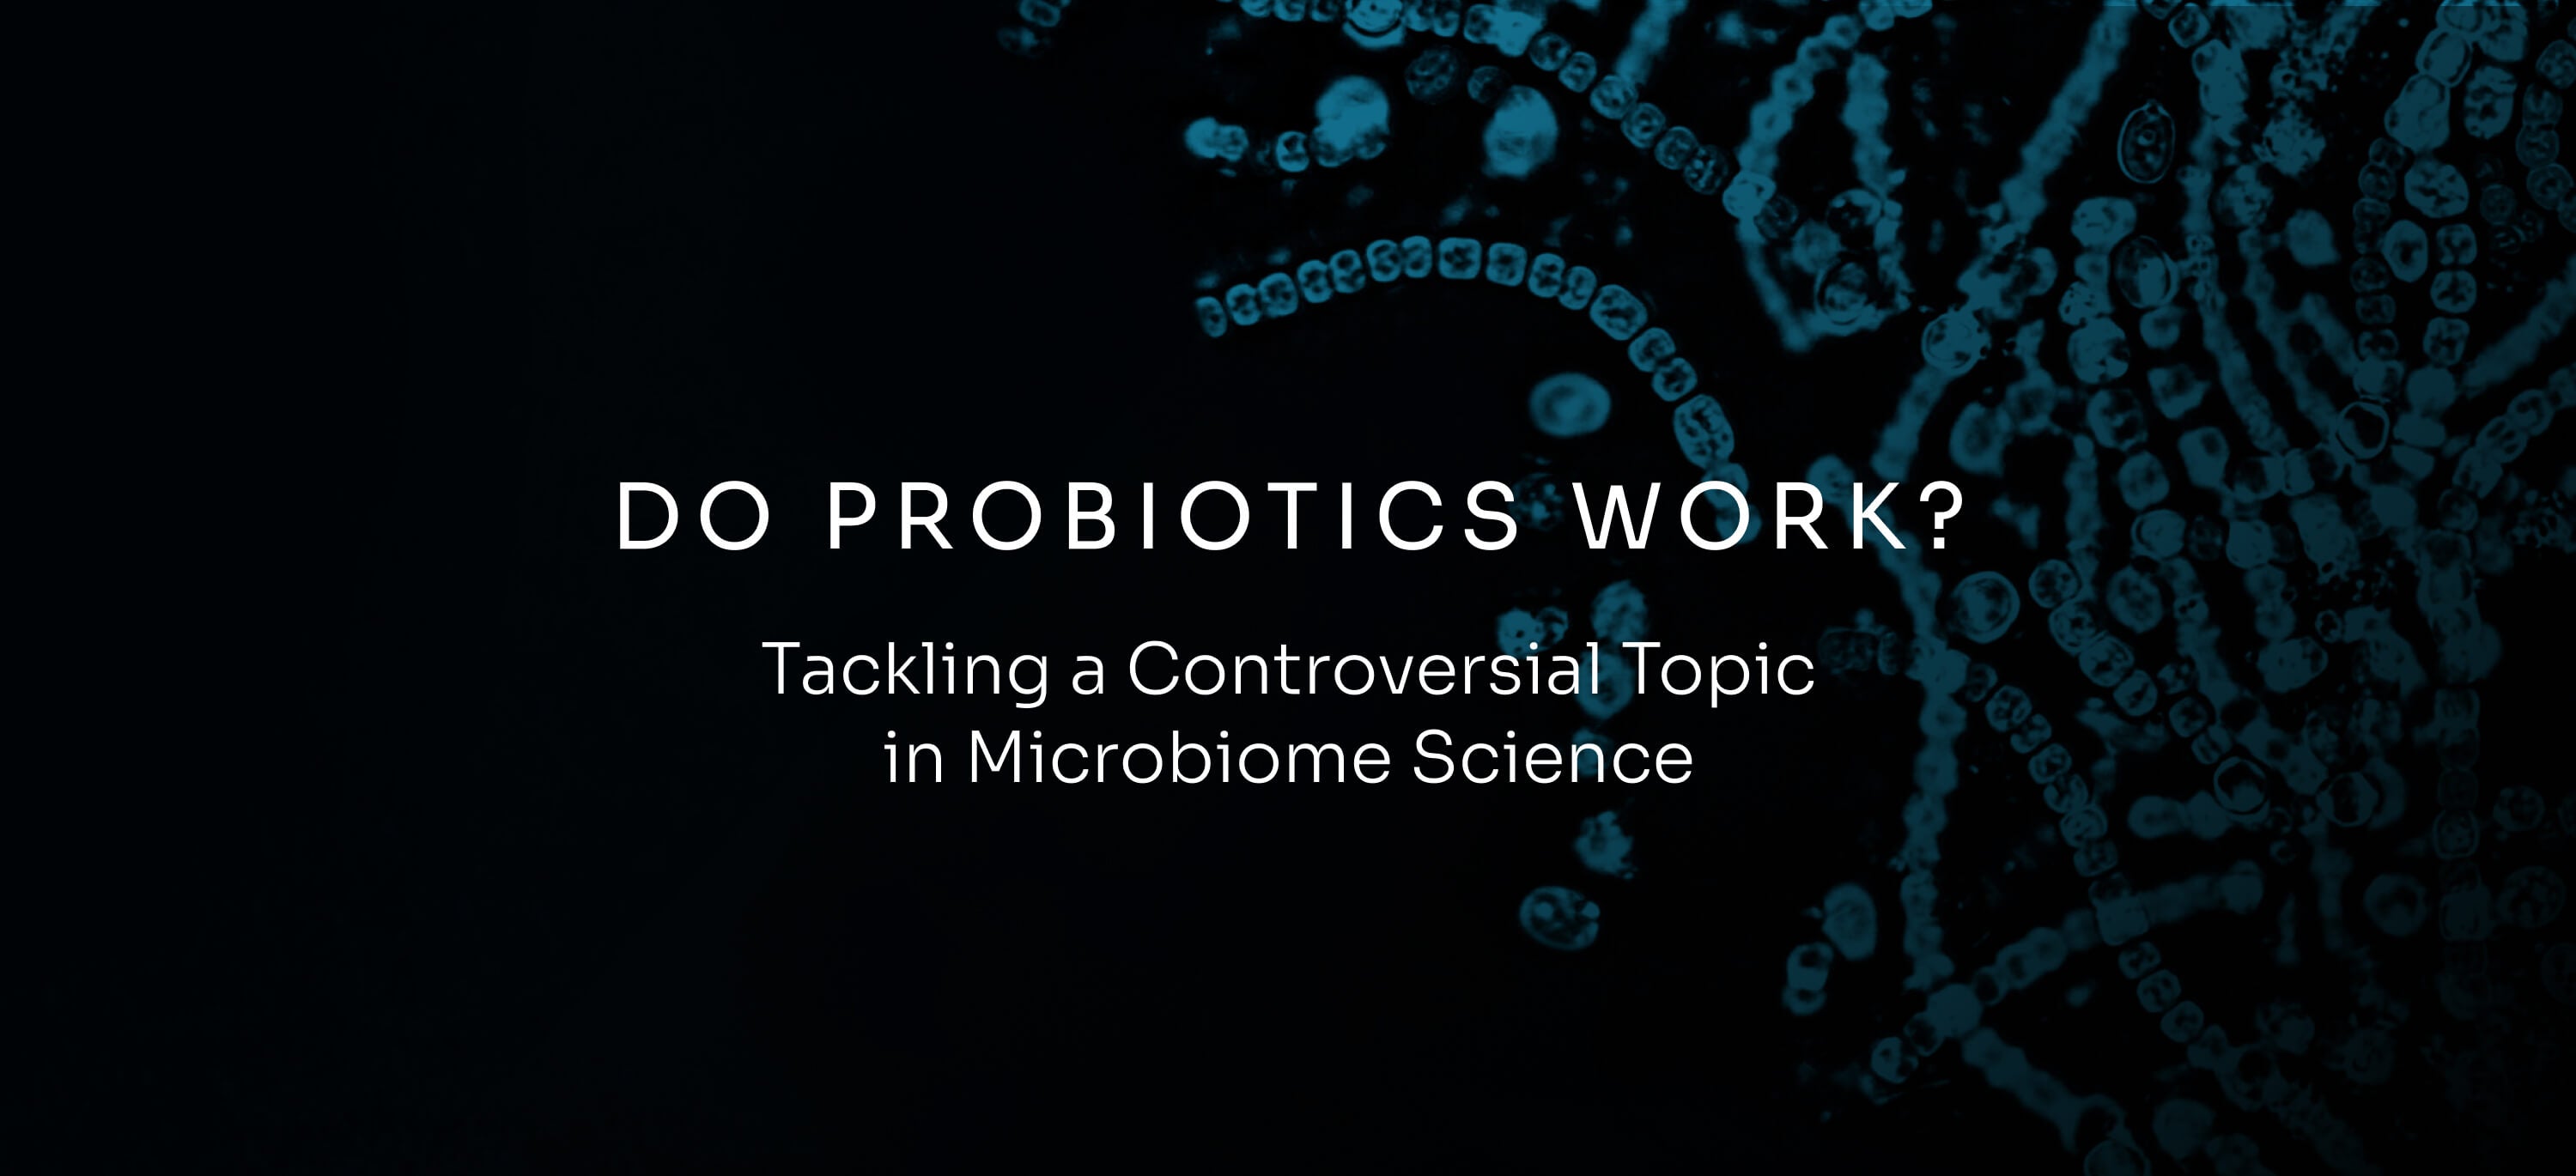 Do Probiotics Work? Tackling a Controversial Topic in Microbiome Science